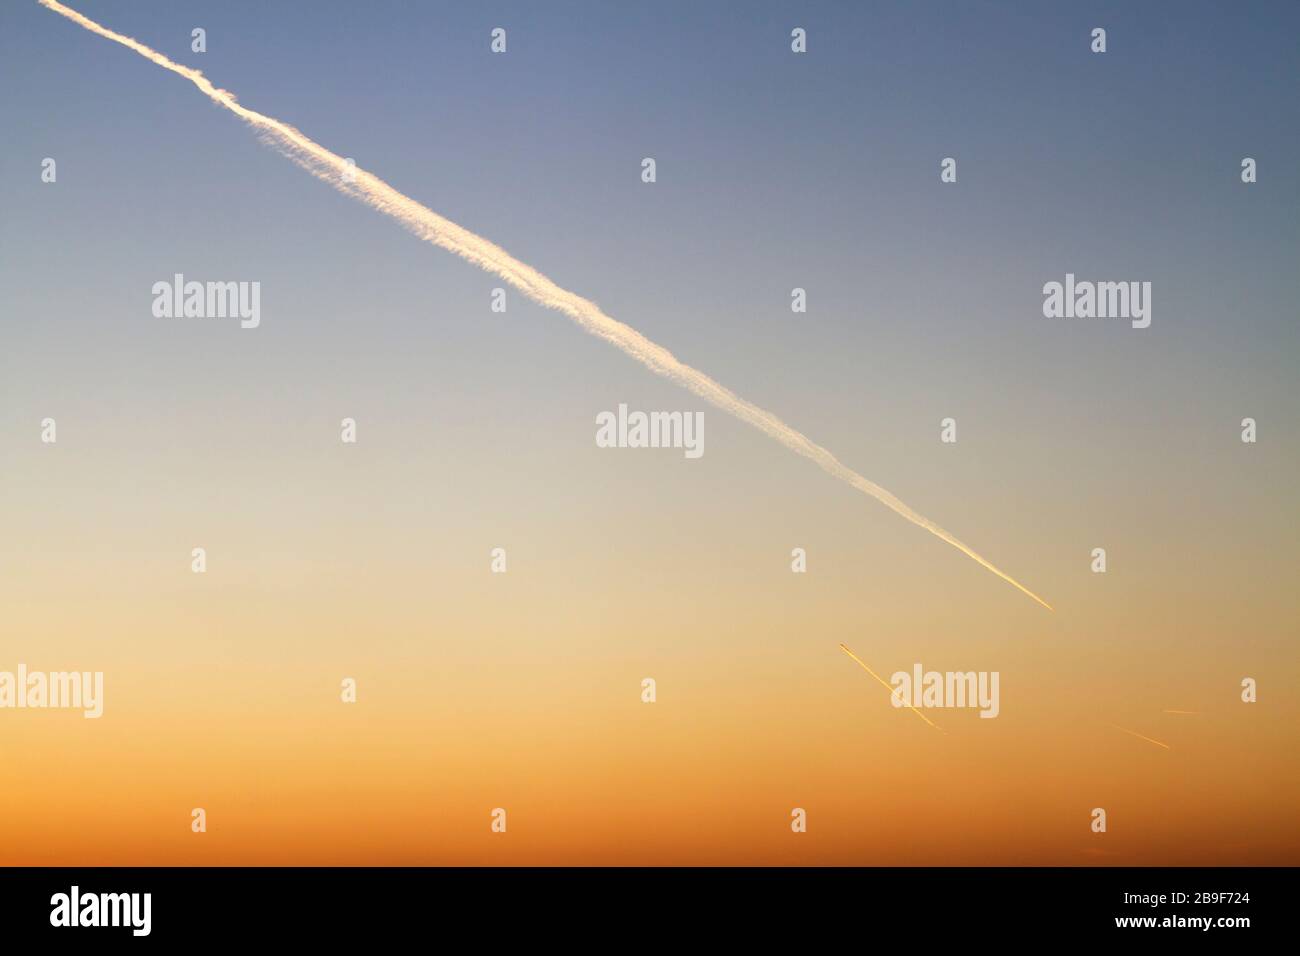 Condensation trails in the sky at sunset or sunrise Stock Photo